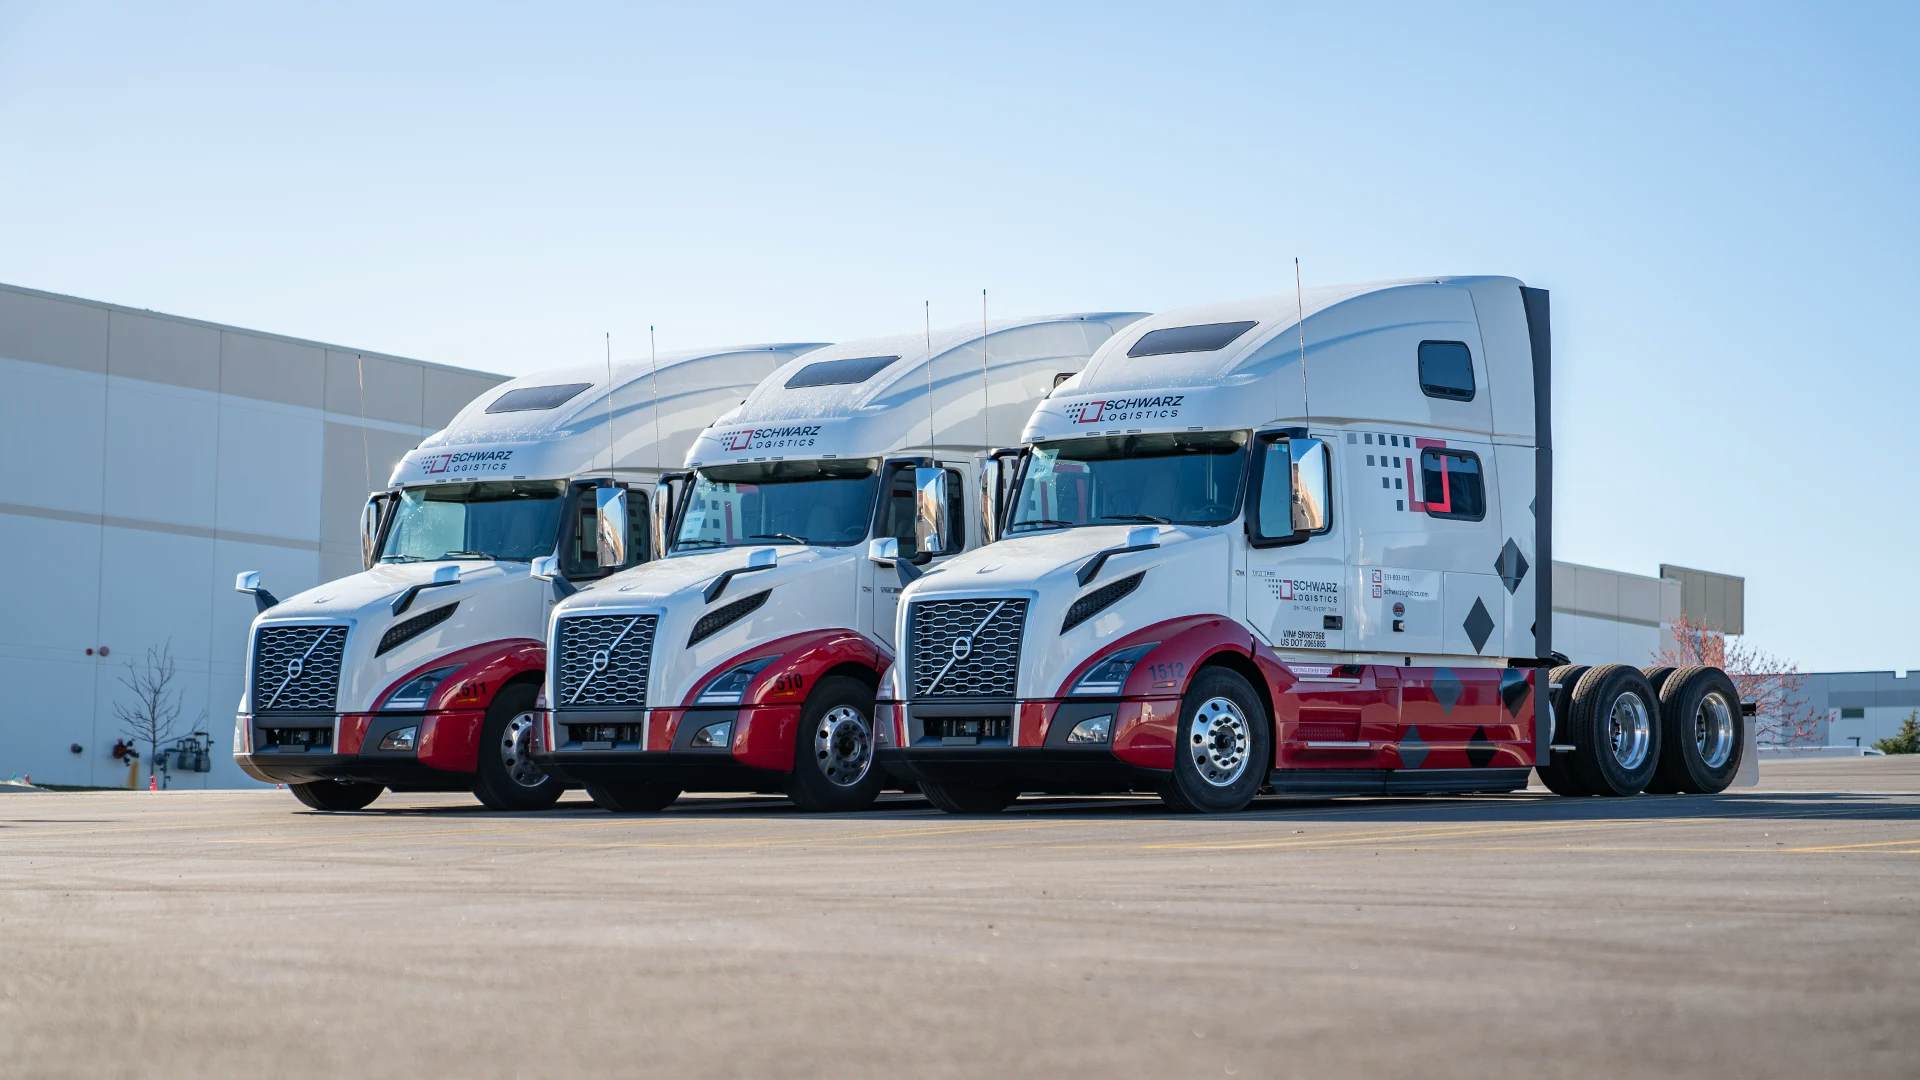 Three modern white semi-trucks with red and gray accents, branded 'SCHWARZ LOGISTICS', are parked side by side in front of a large industrial building, reflecting a fleet-ready position under a clear blue sky.